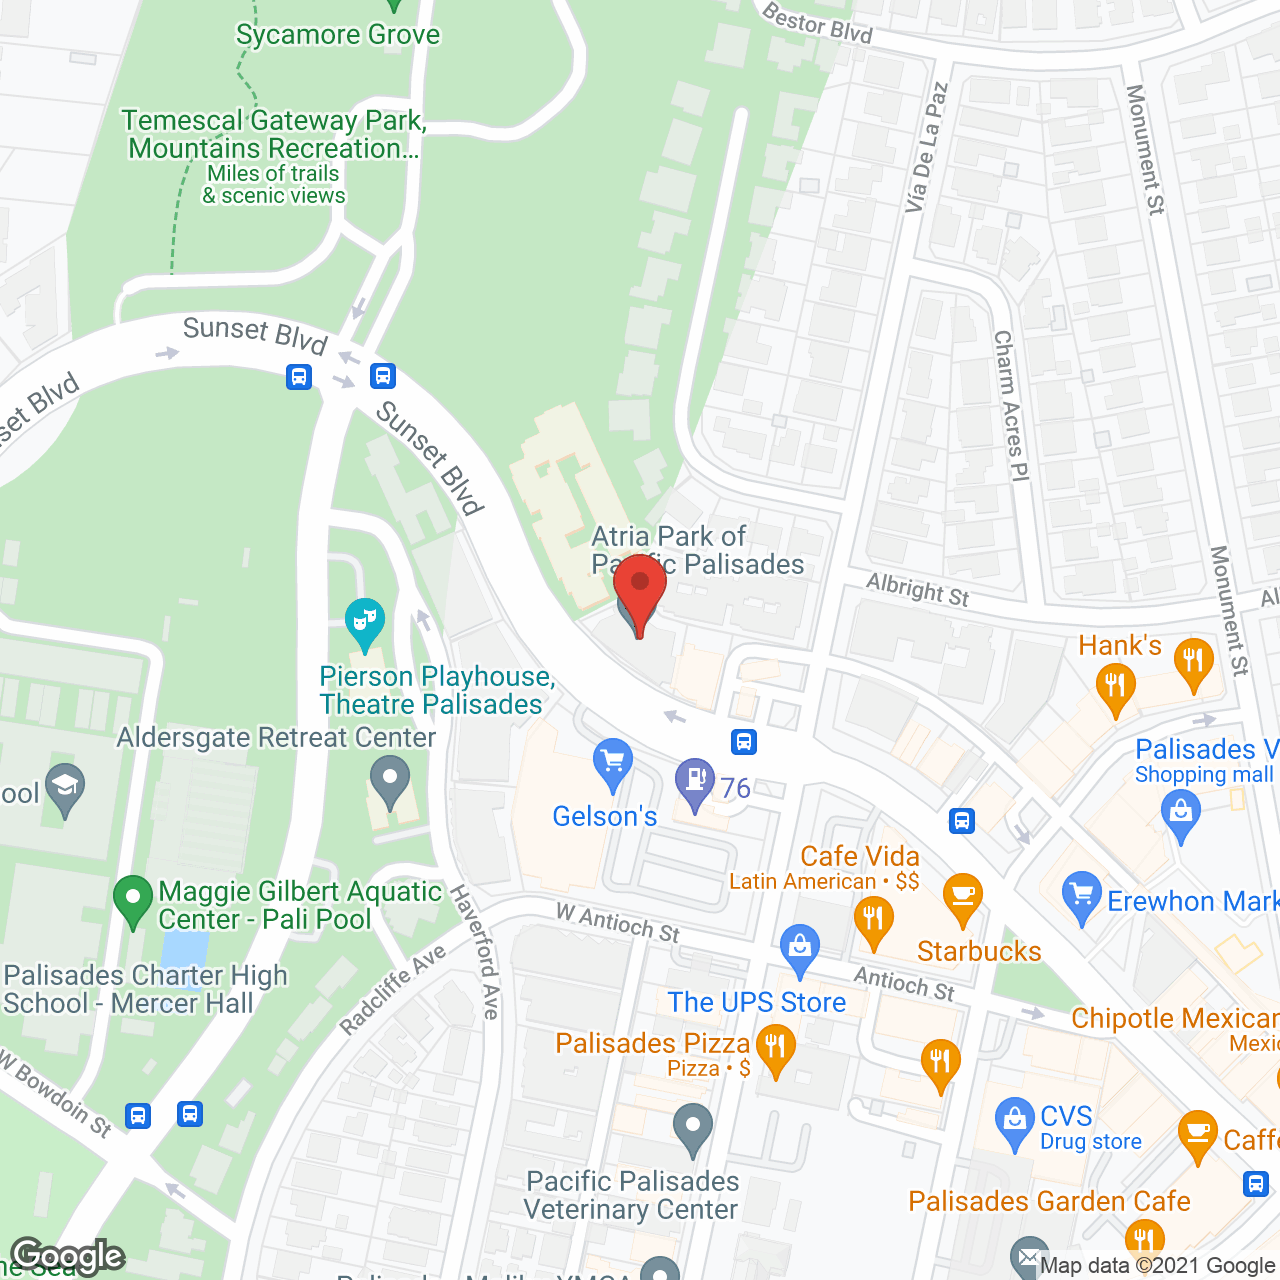 Atria Park of Pacific Palisades in google map